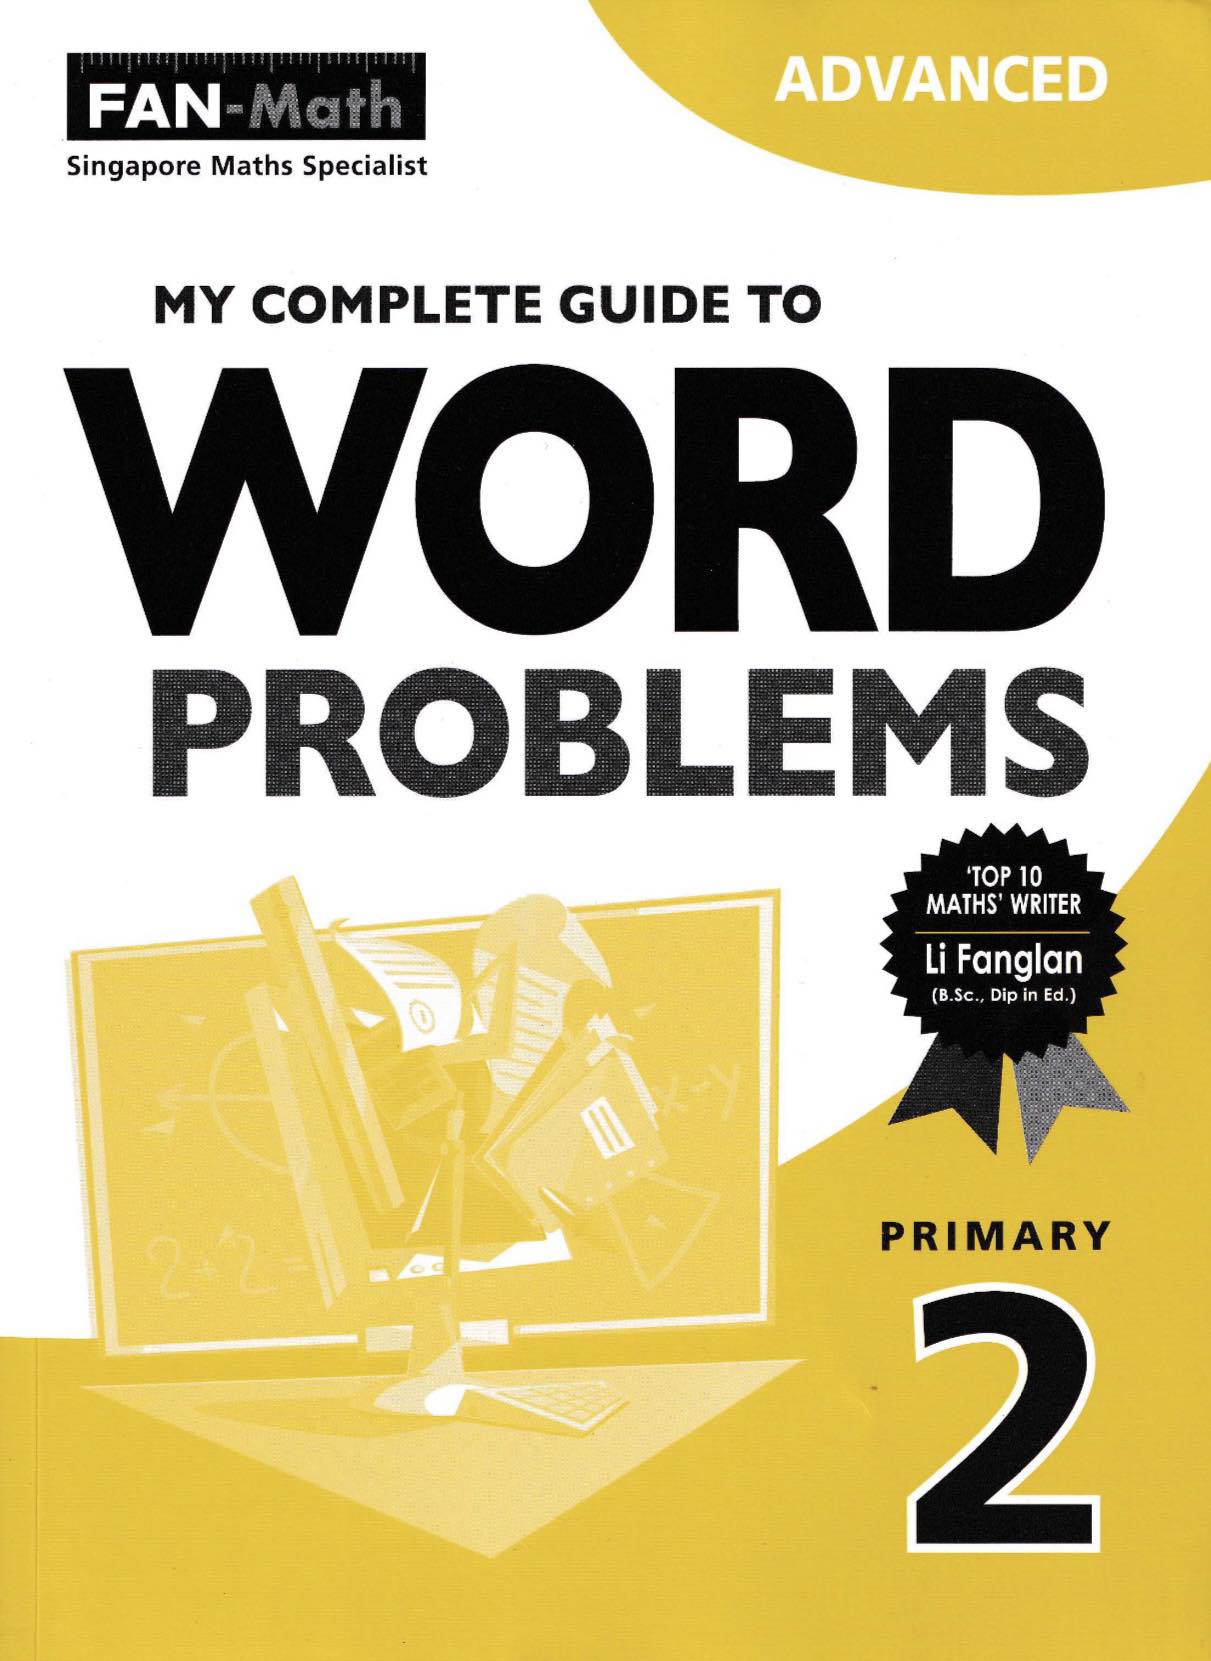 My Complete Guide to Word Problems (Advanced) for Primary Levels